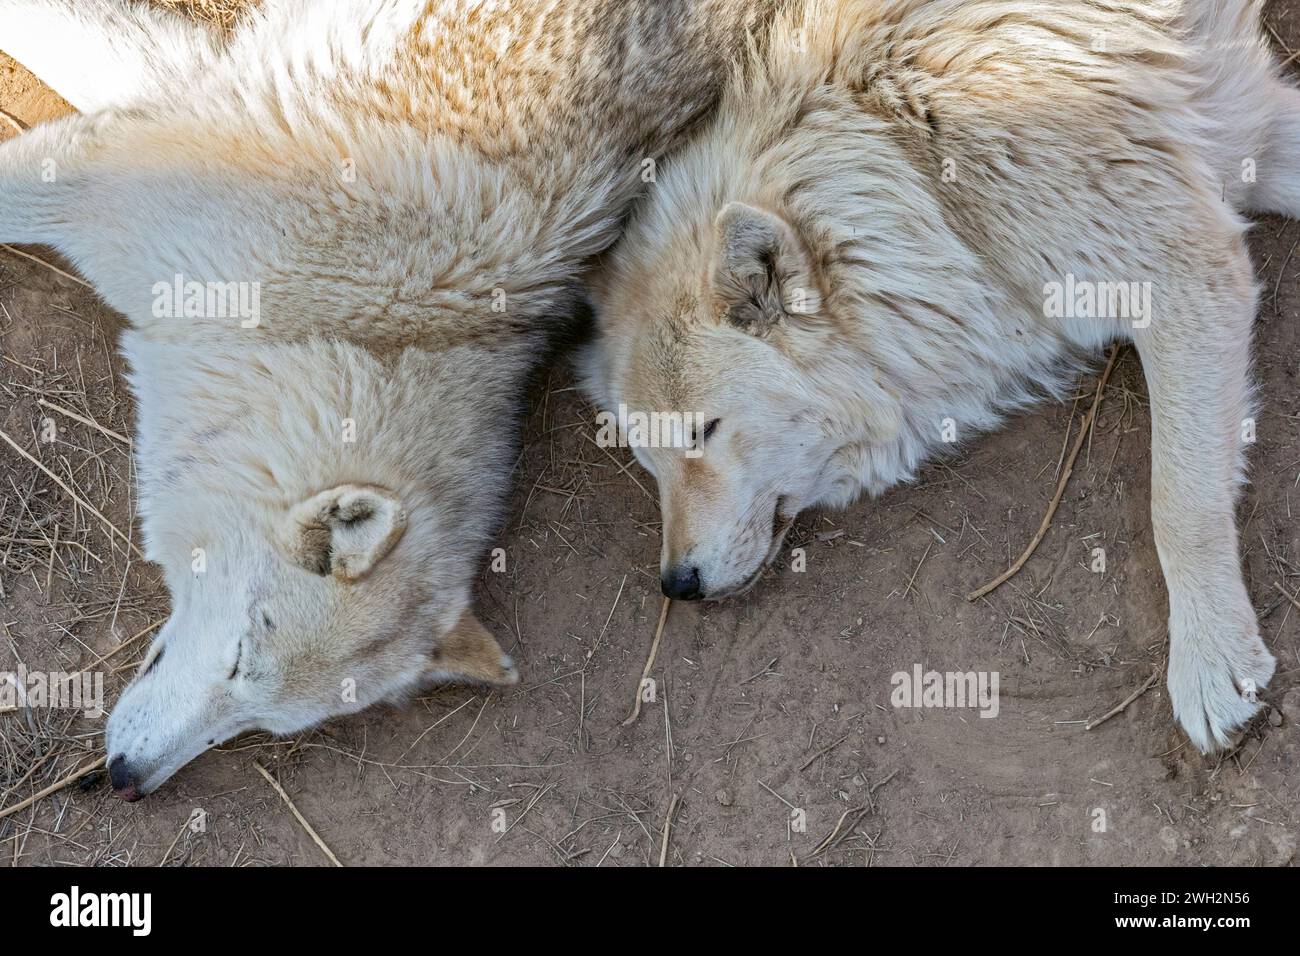 Keenesburg, Colorado - Wolves sleeping at the Wild Animal Sanctuary, a nonprofit that rescues animals that have been abused or held illegally. An elev Stock Photo